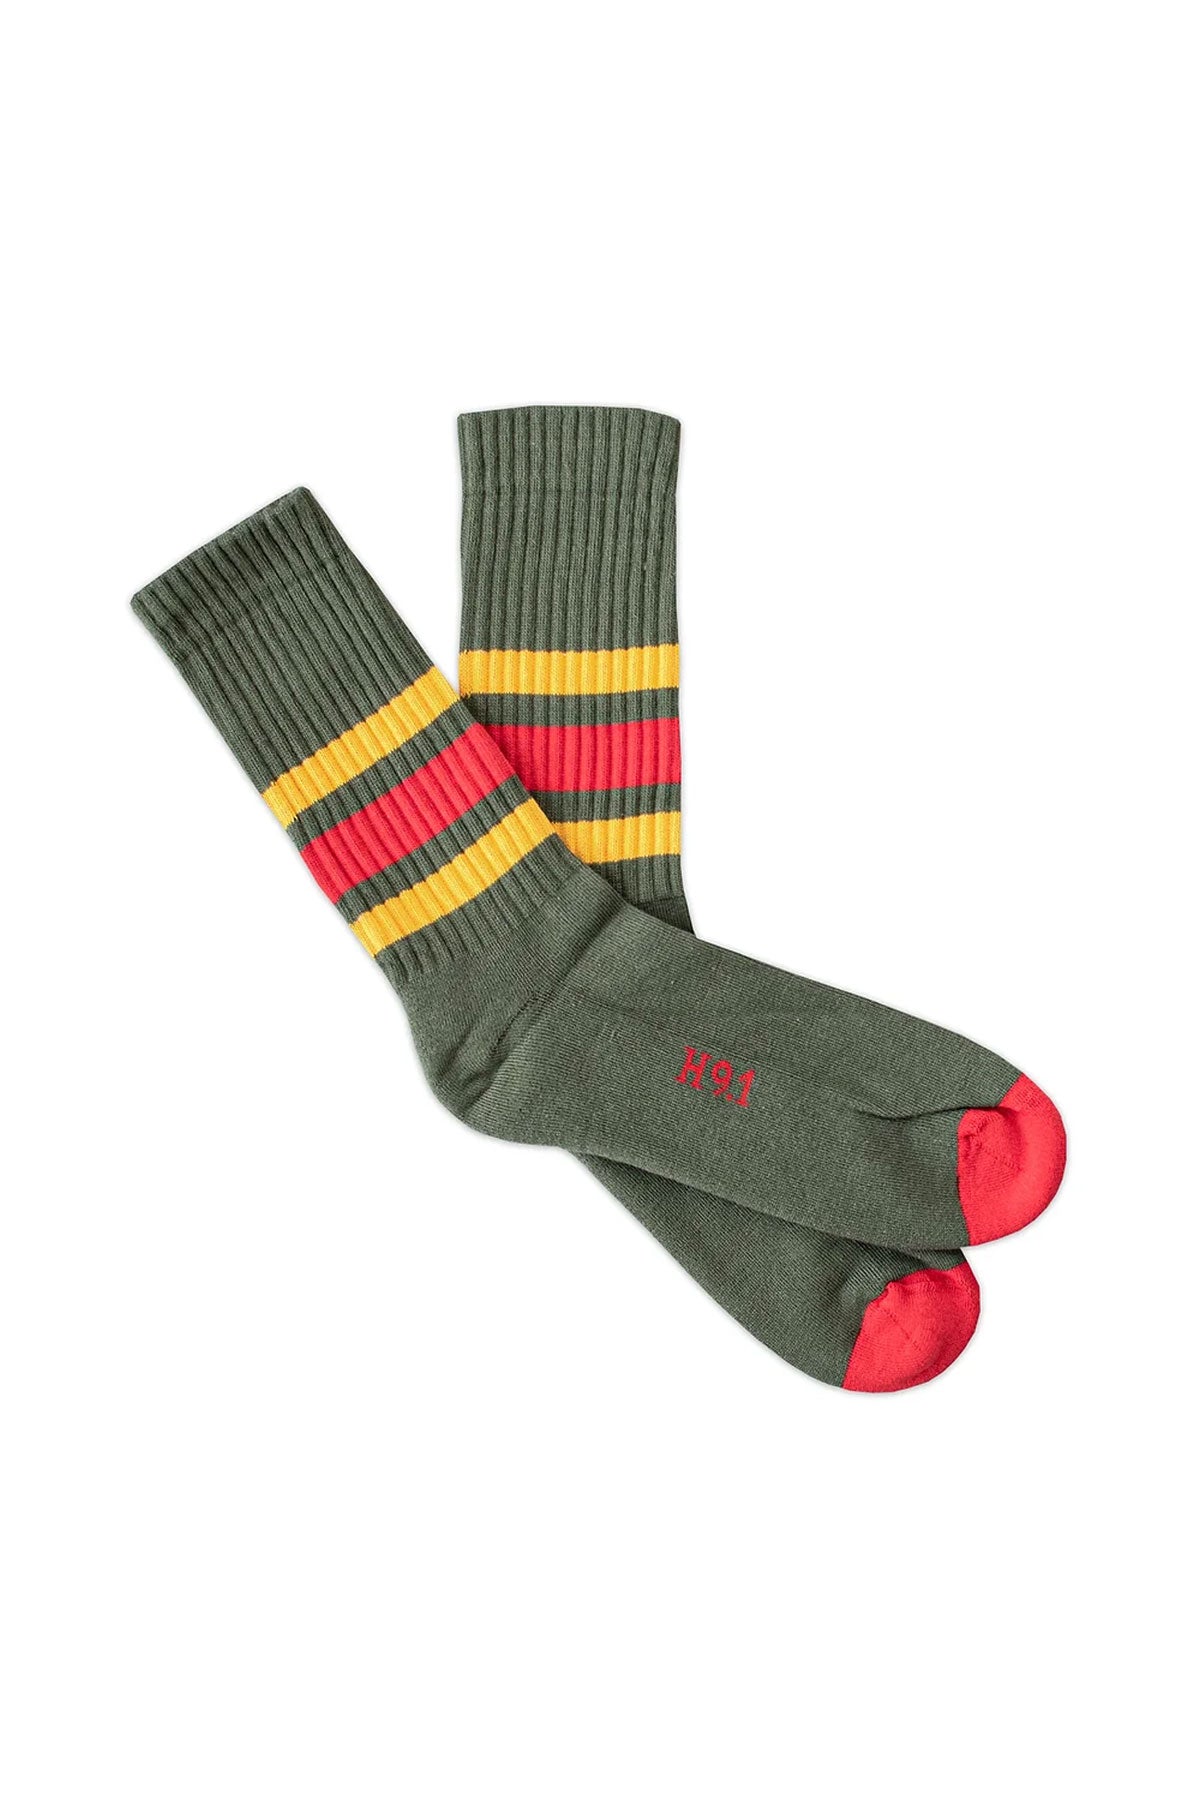 Heritage9.1 - Rucker - Military Green w/ Red & Yellow Stripes